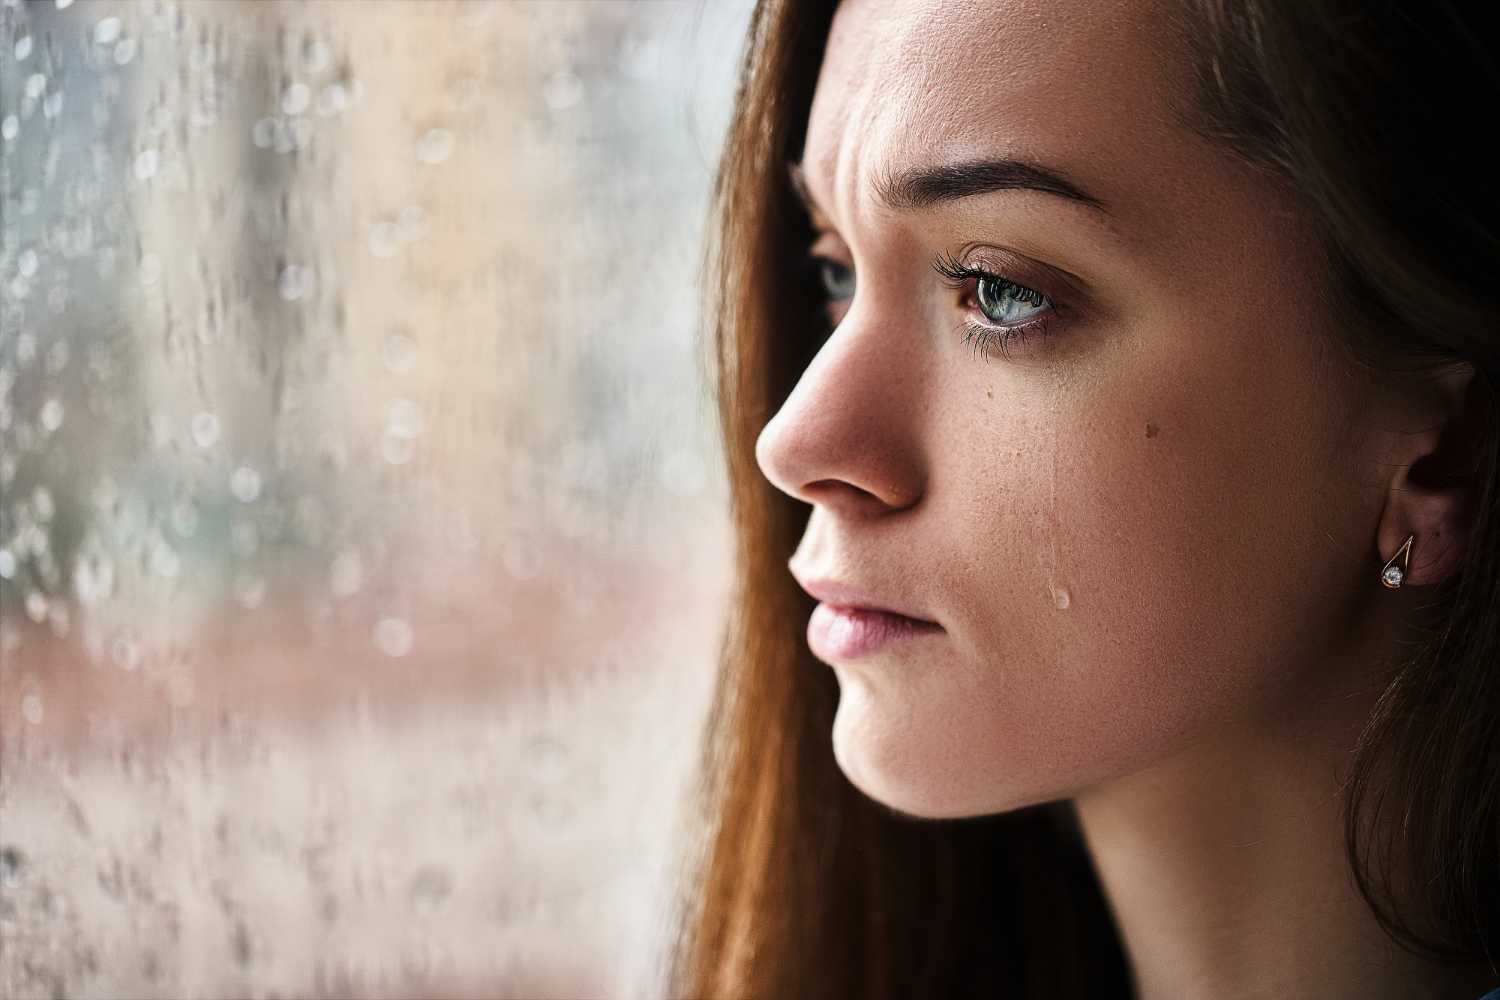 Does Crying Help You Burn Calories? Benefits & Disadvantages of Crying